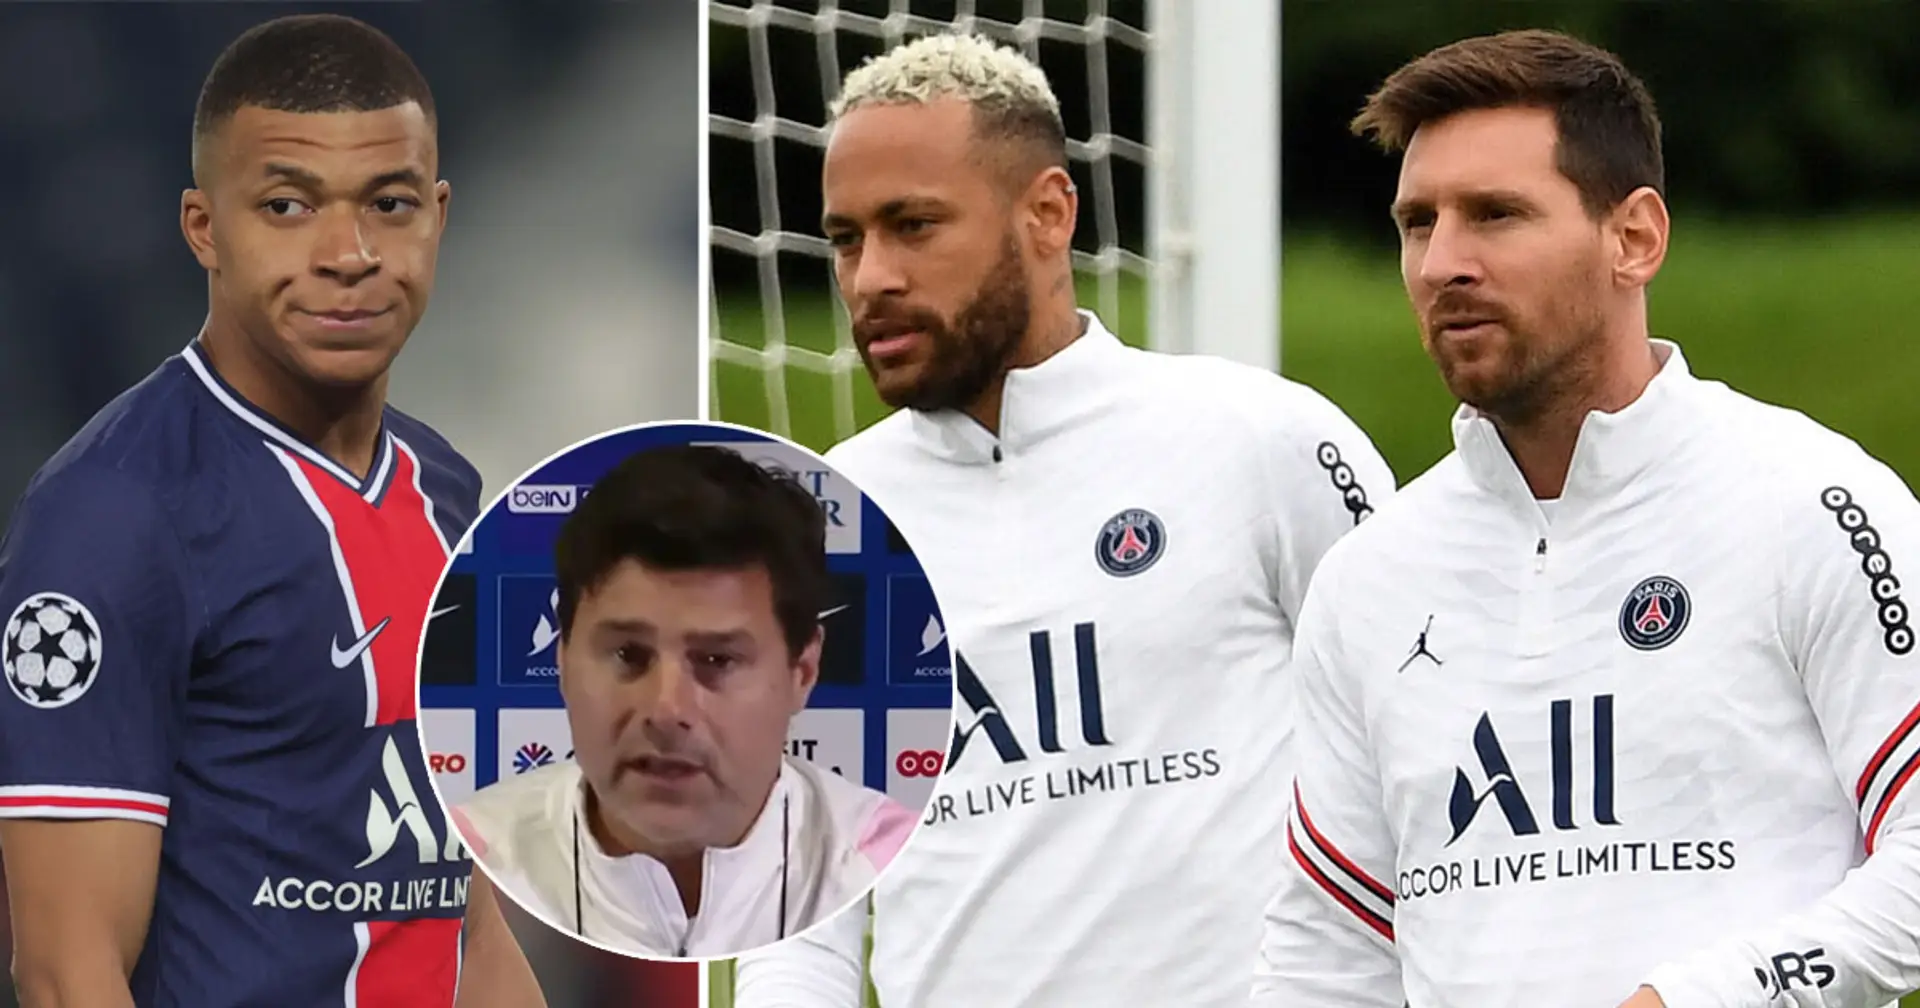 'Messi, Neymar, Di Maria know each other well': Pochettino admits Mbappe is odd one out in PSG's attack